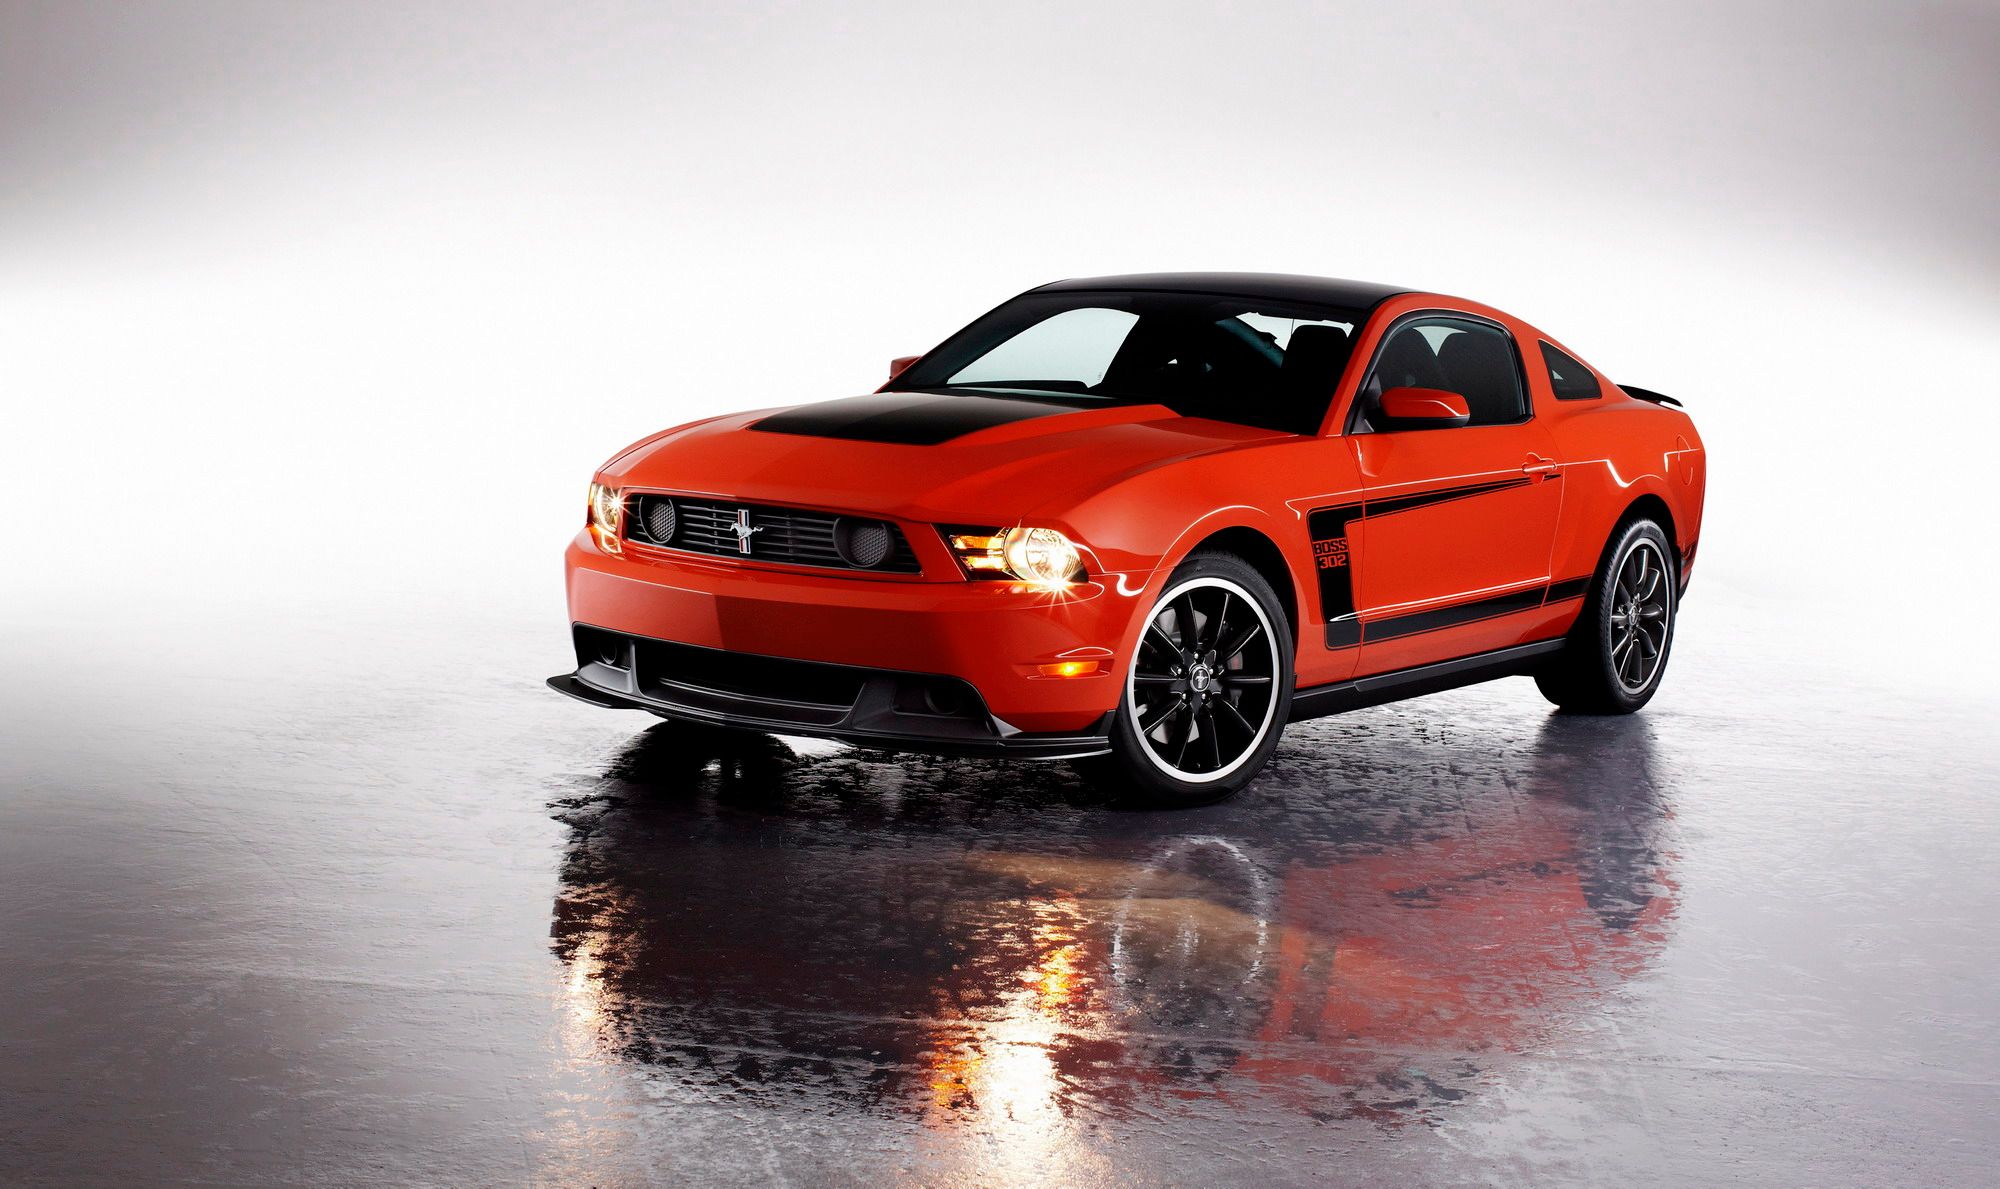 2012 Ford Mustang Boss 302 